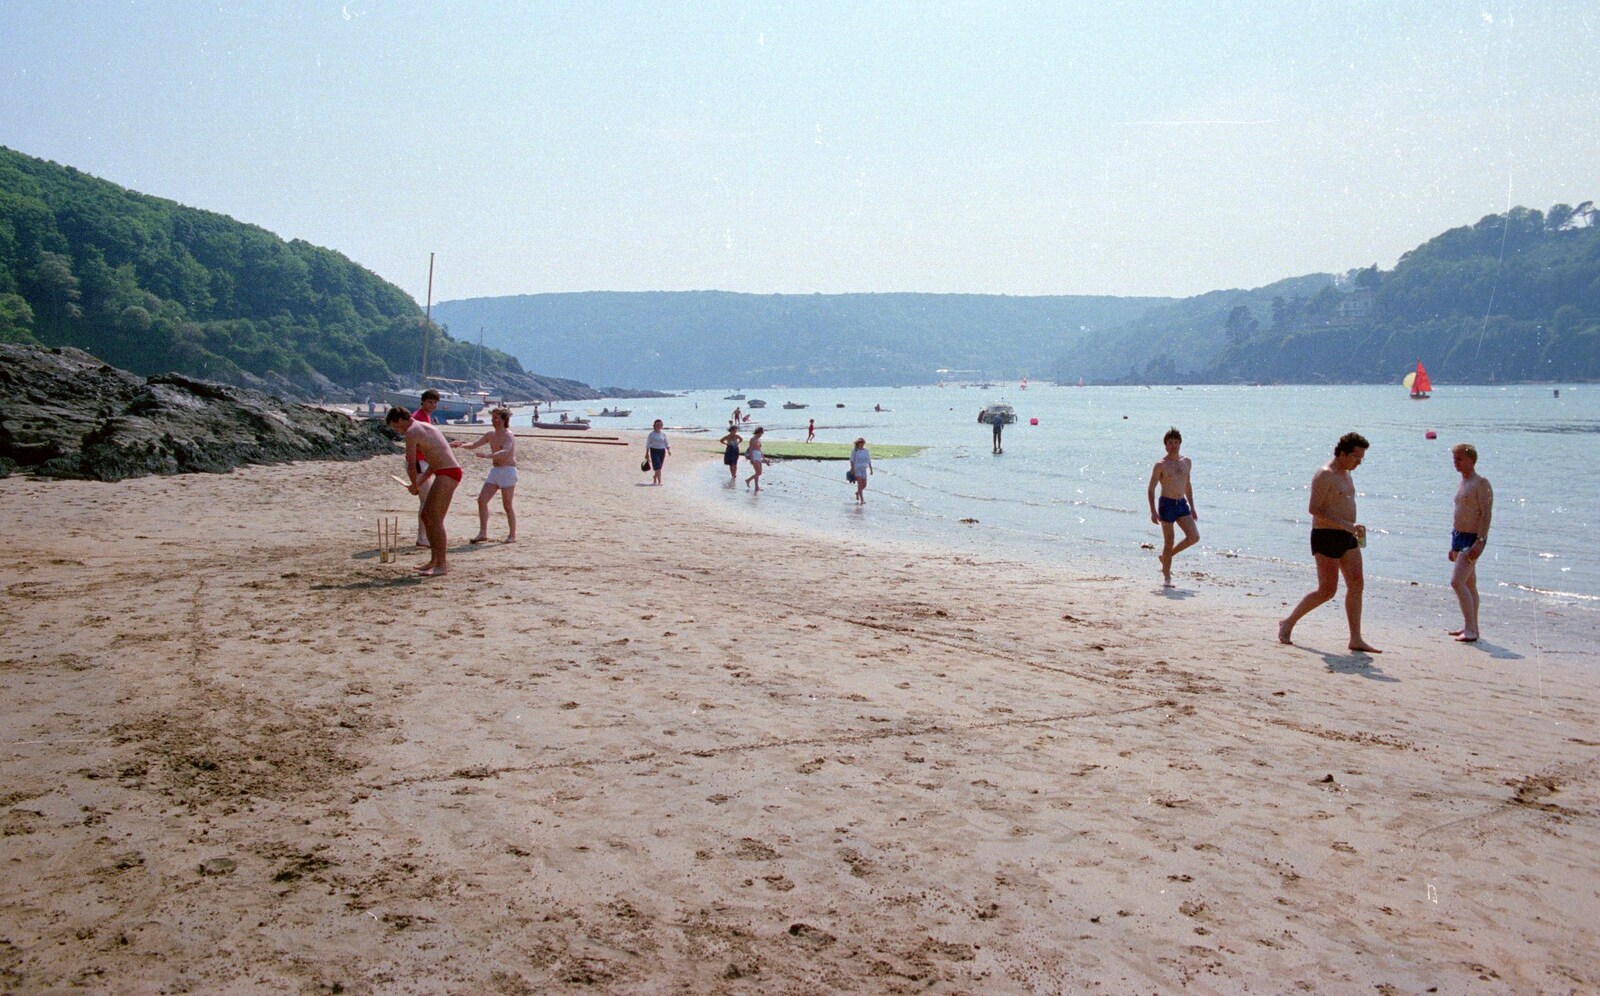 On the beach from Uni: Twenty One Guns and Footie on the Beach, Plymouth Hoe and Salcombe, Devon - 15th June 1986